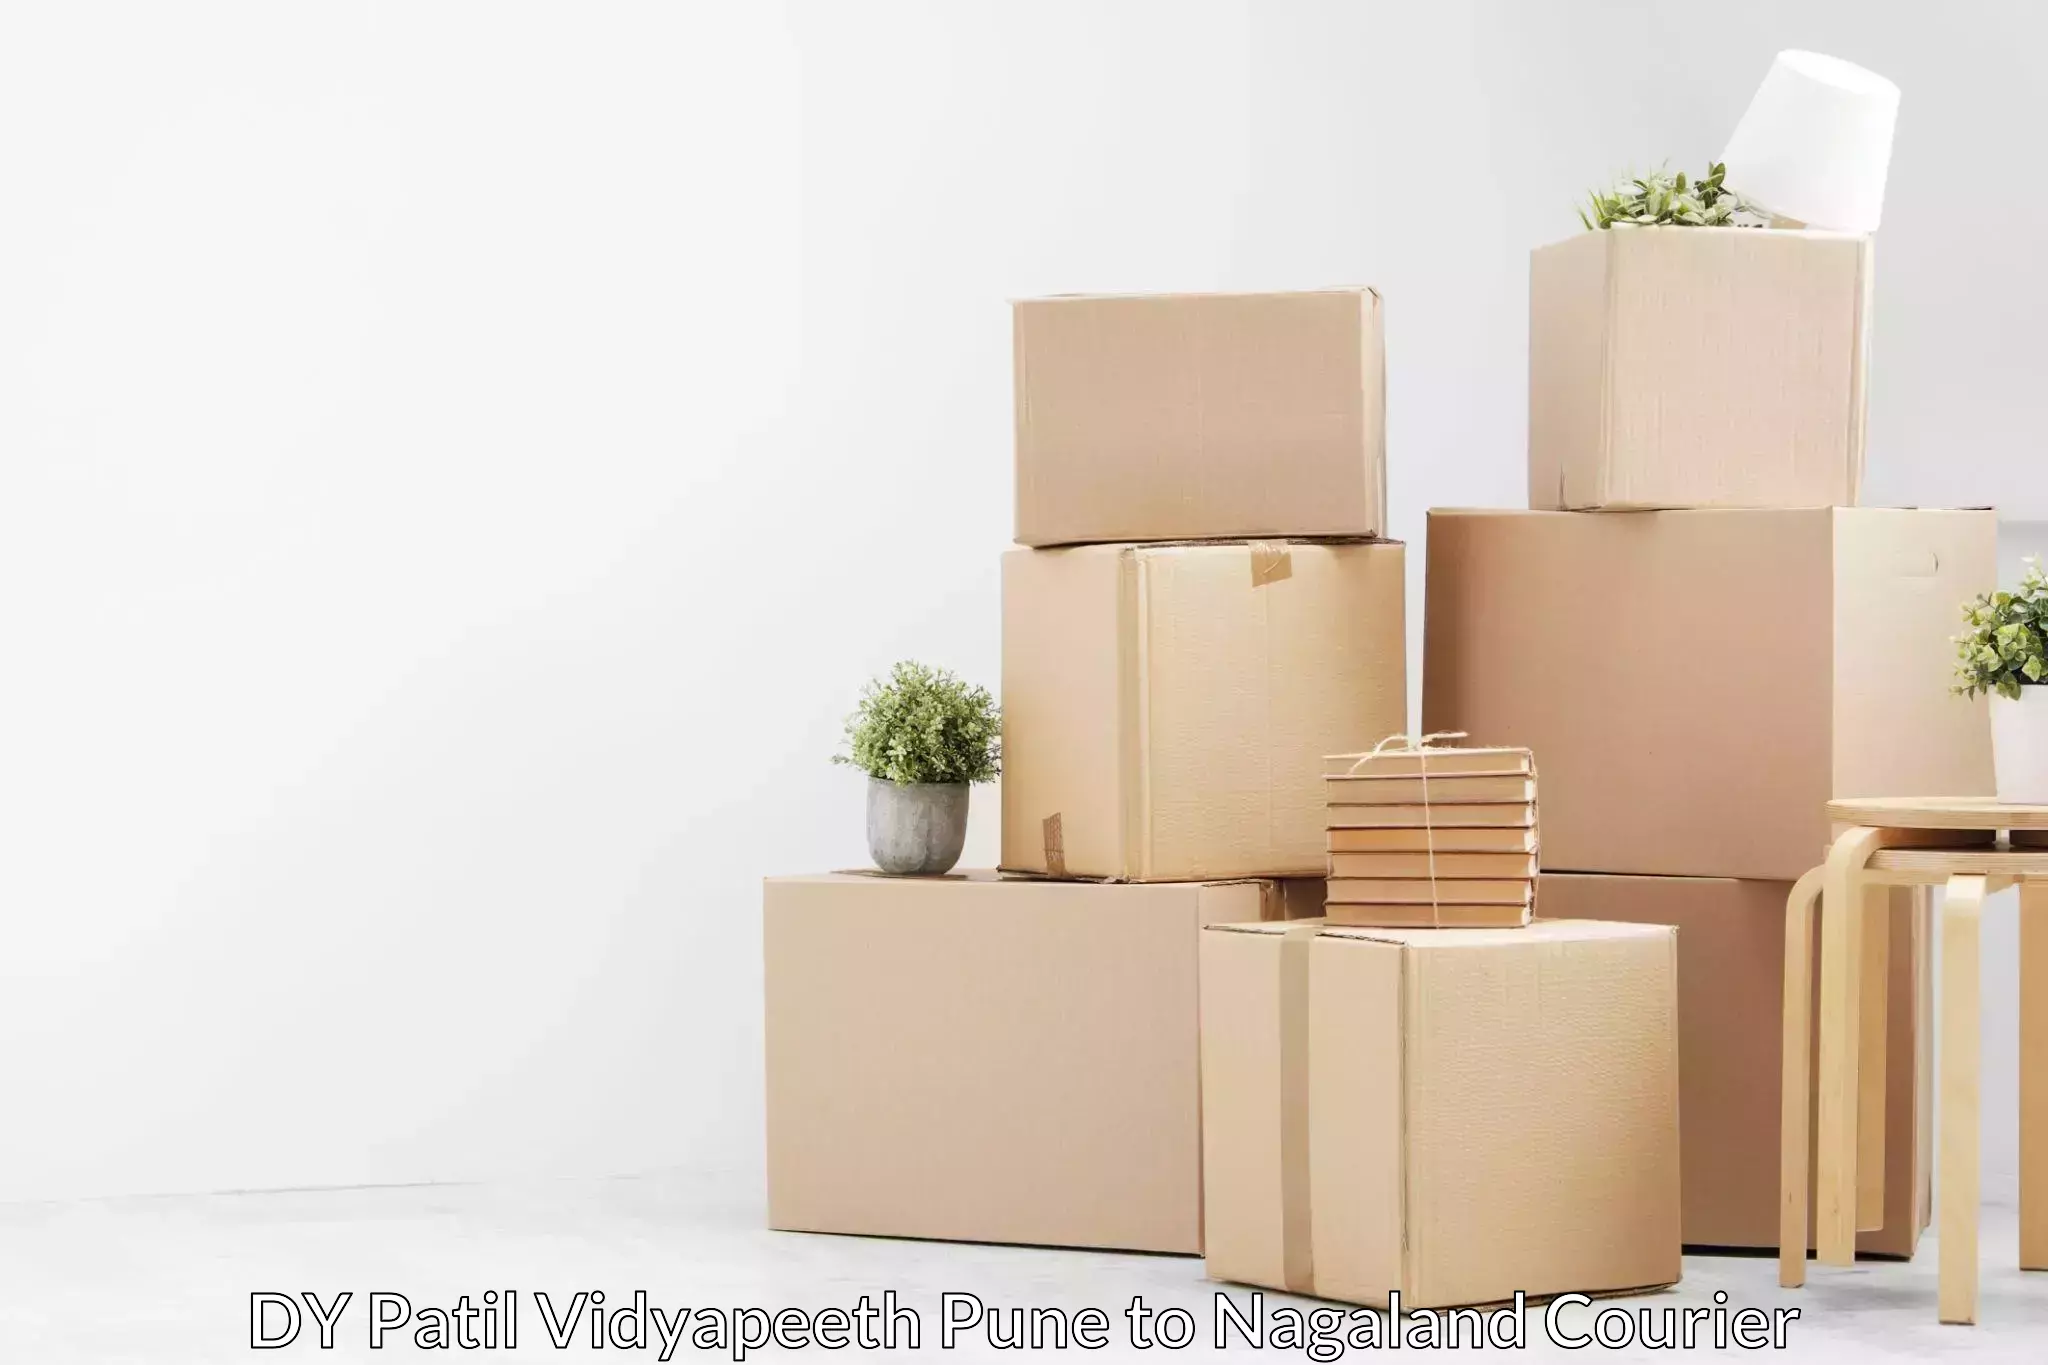 Reliable relocation services DY Patil Vidyapeeth Pune to Nagaland